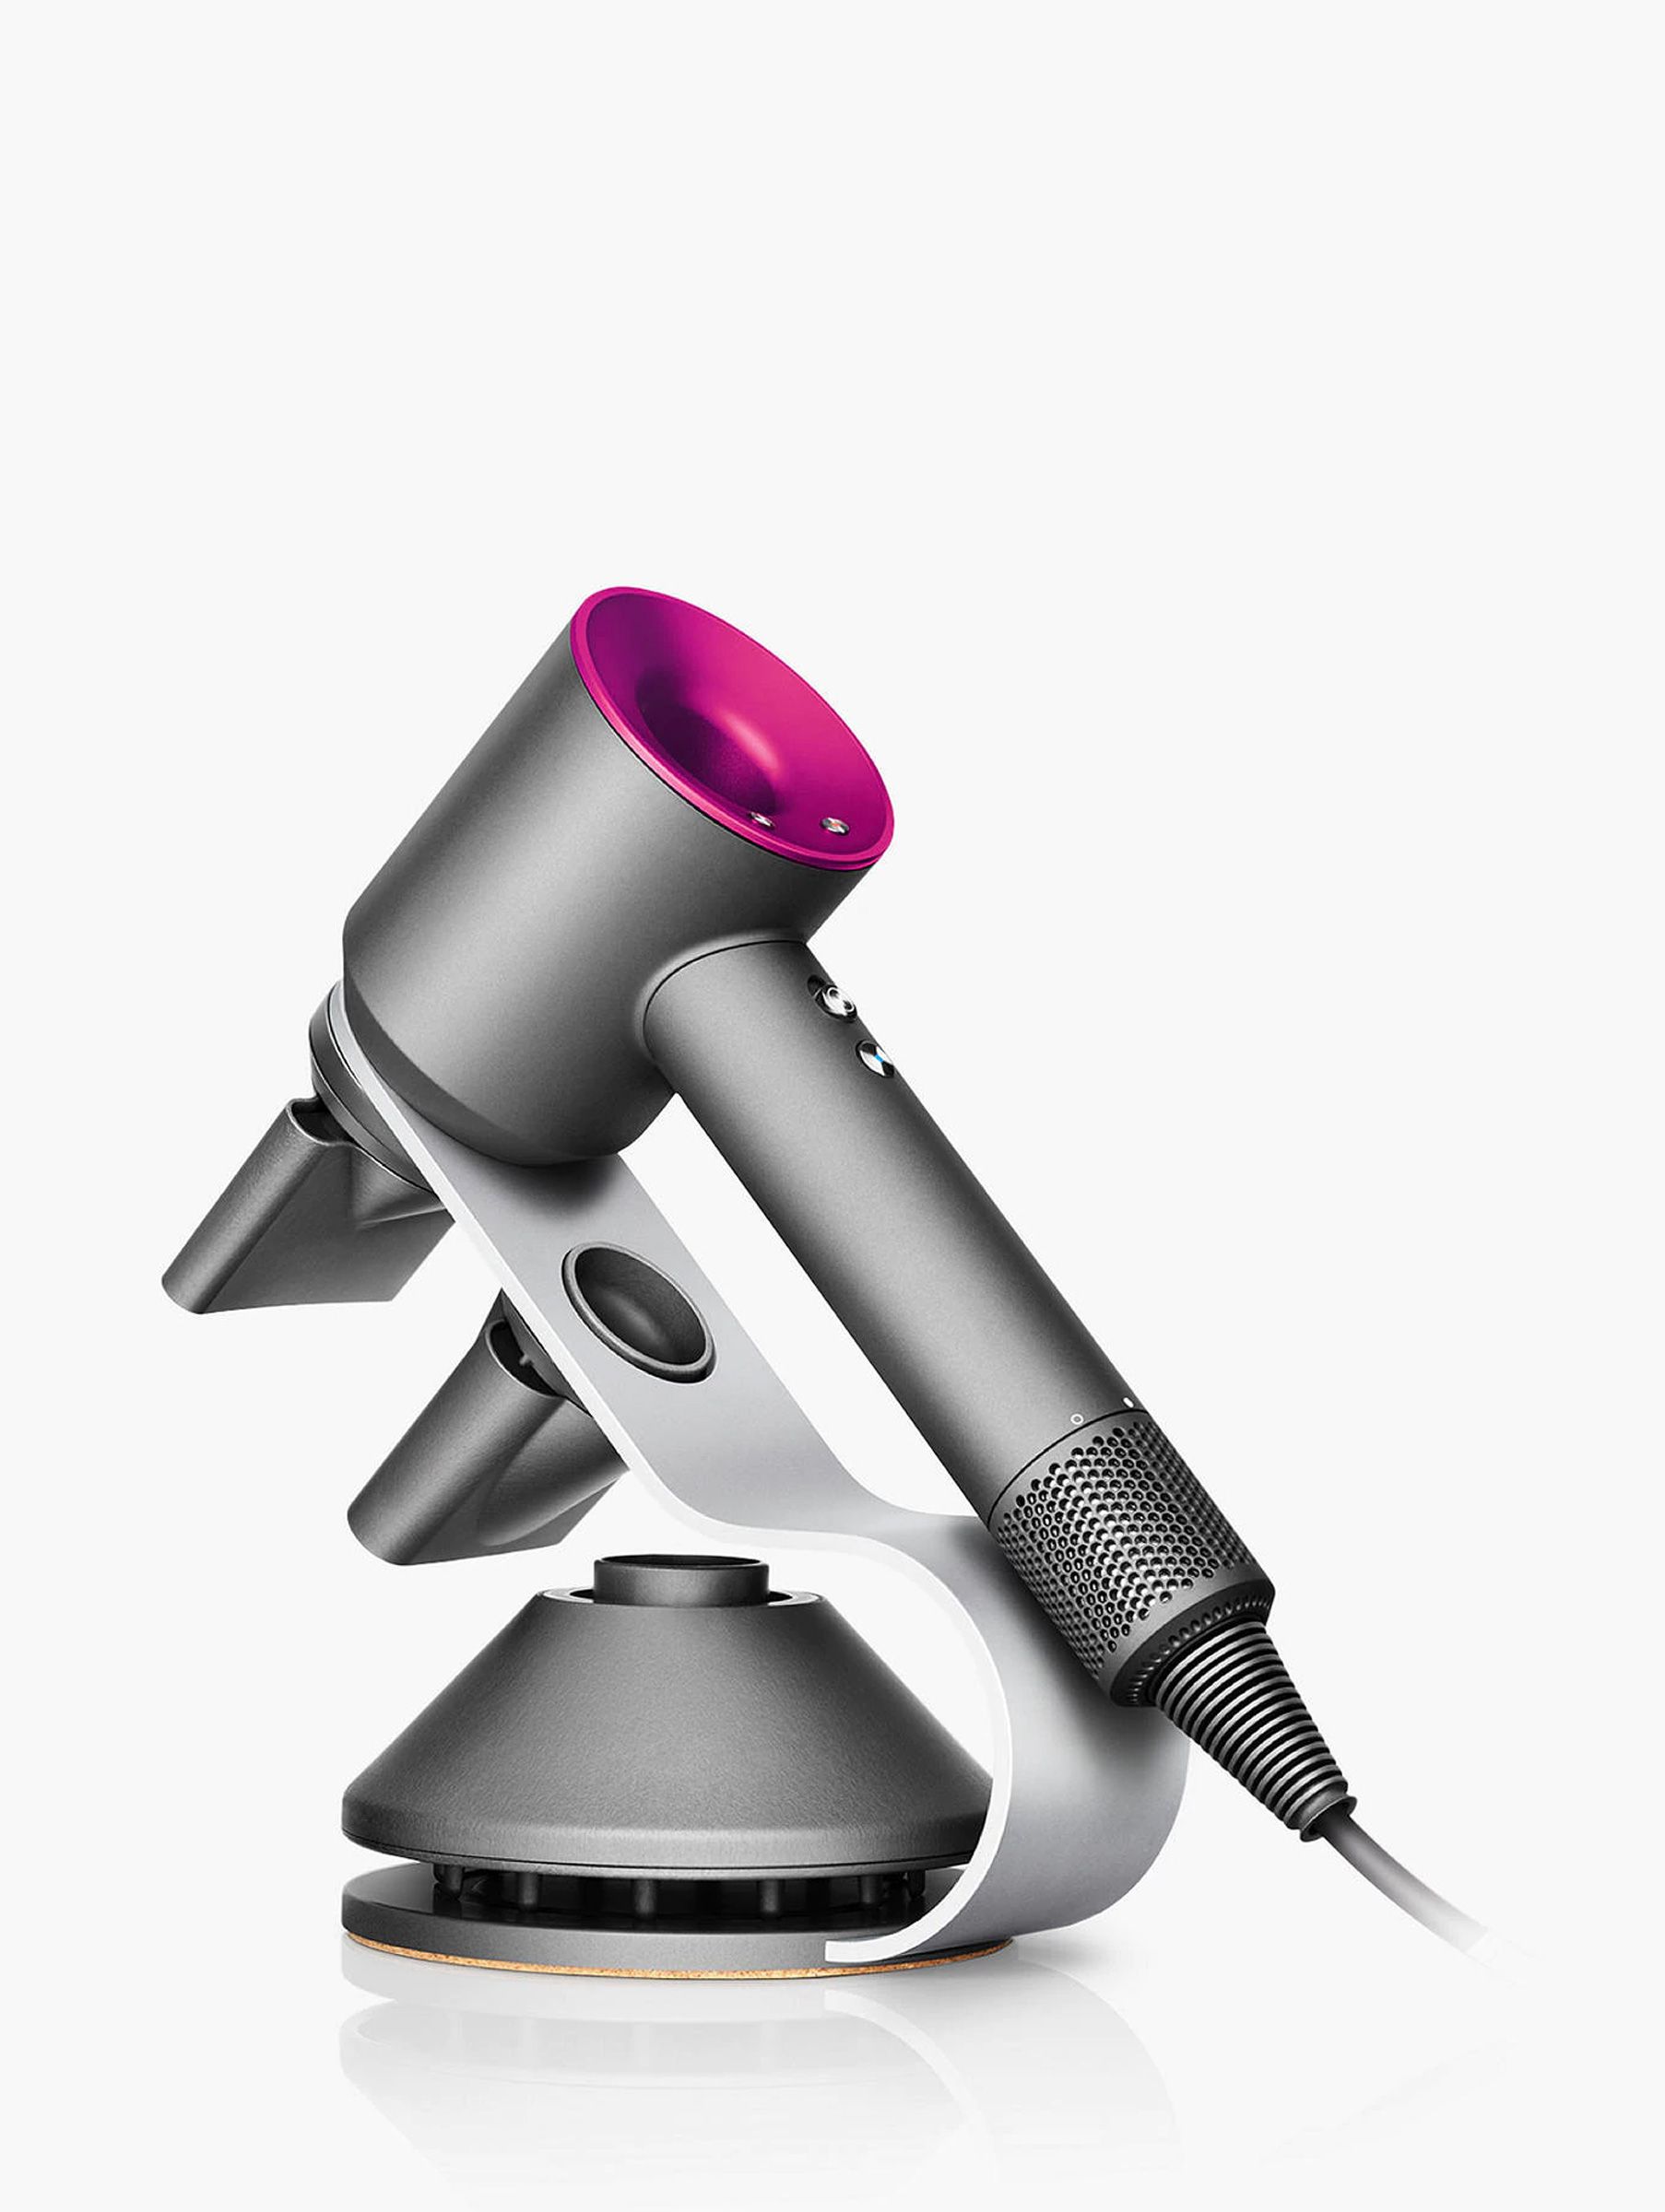 The Dyson Supersonic hairdryer